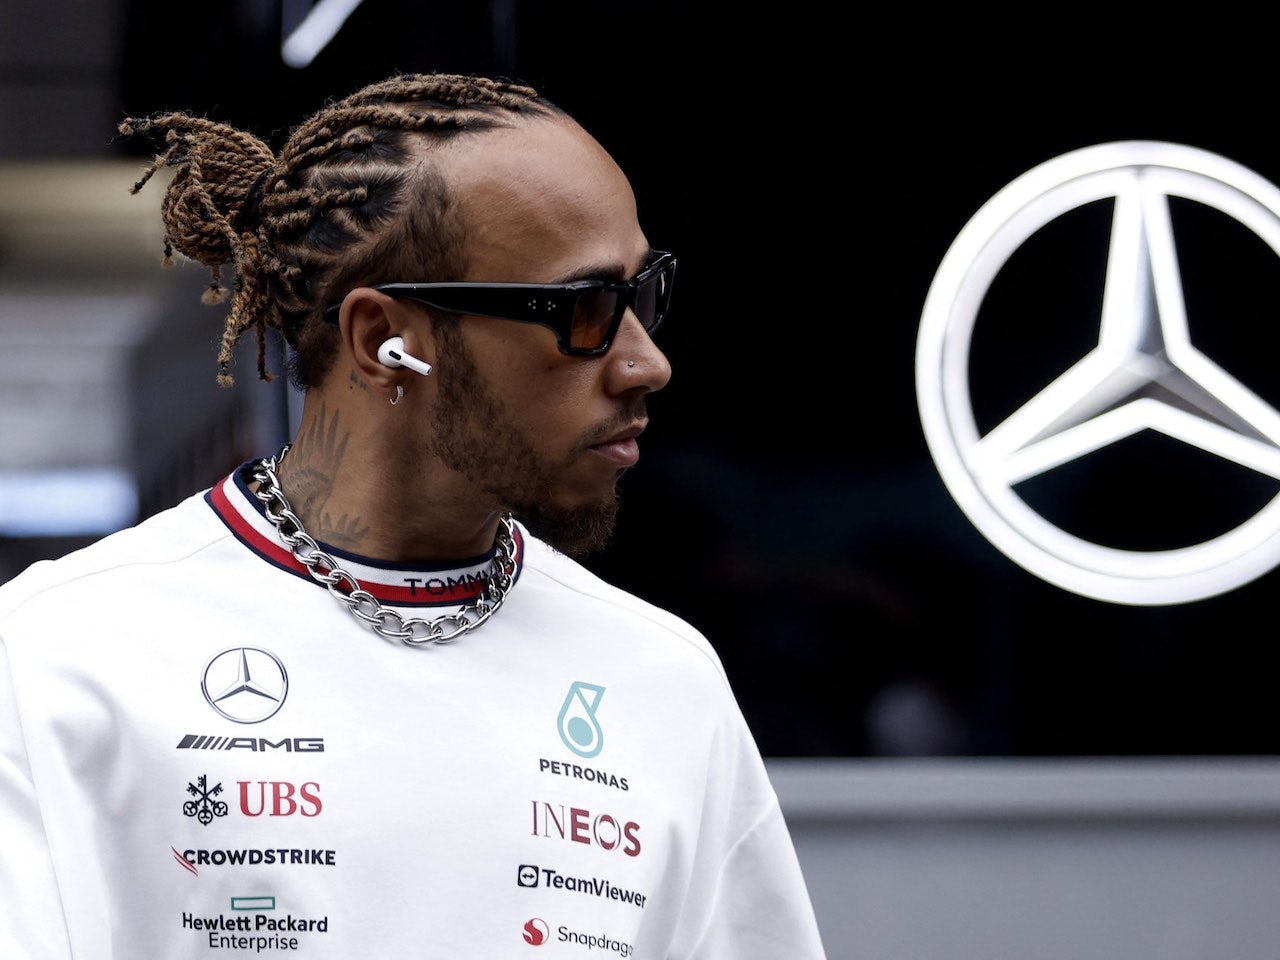 Mercedes to finalise $11m F1 deal with Adidas